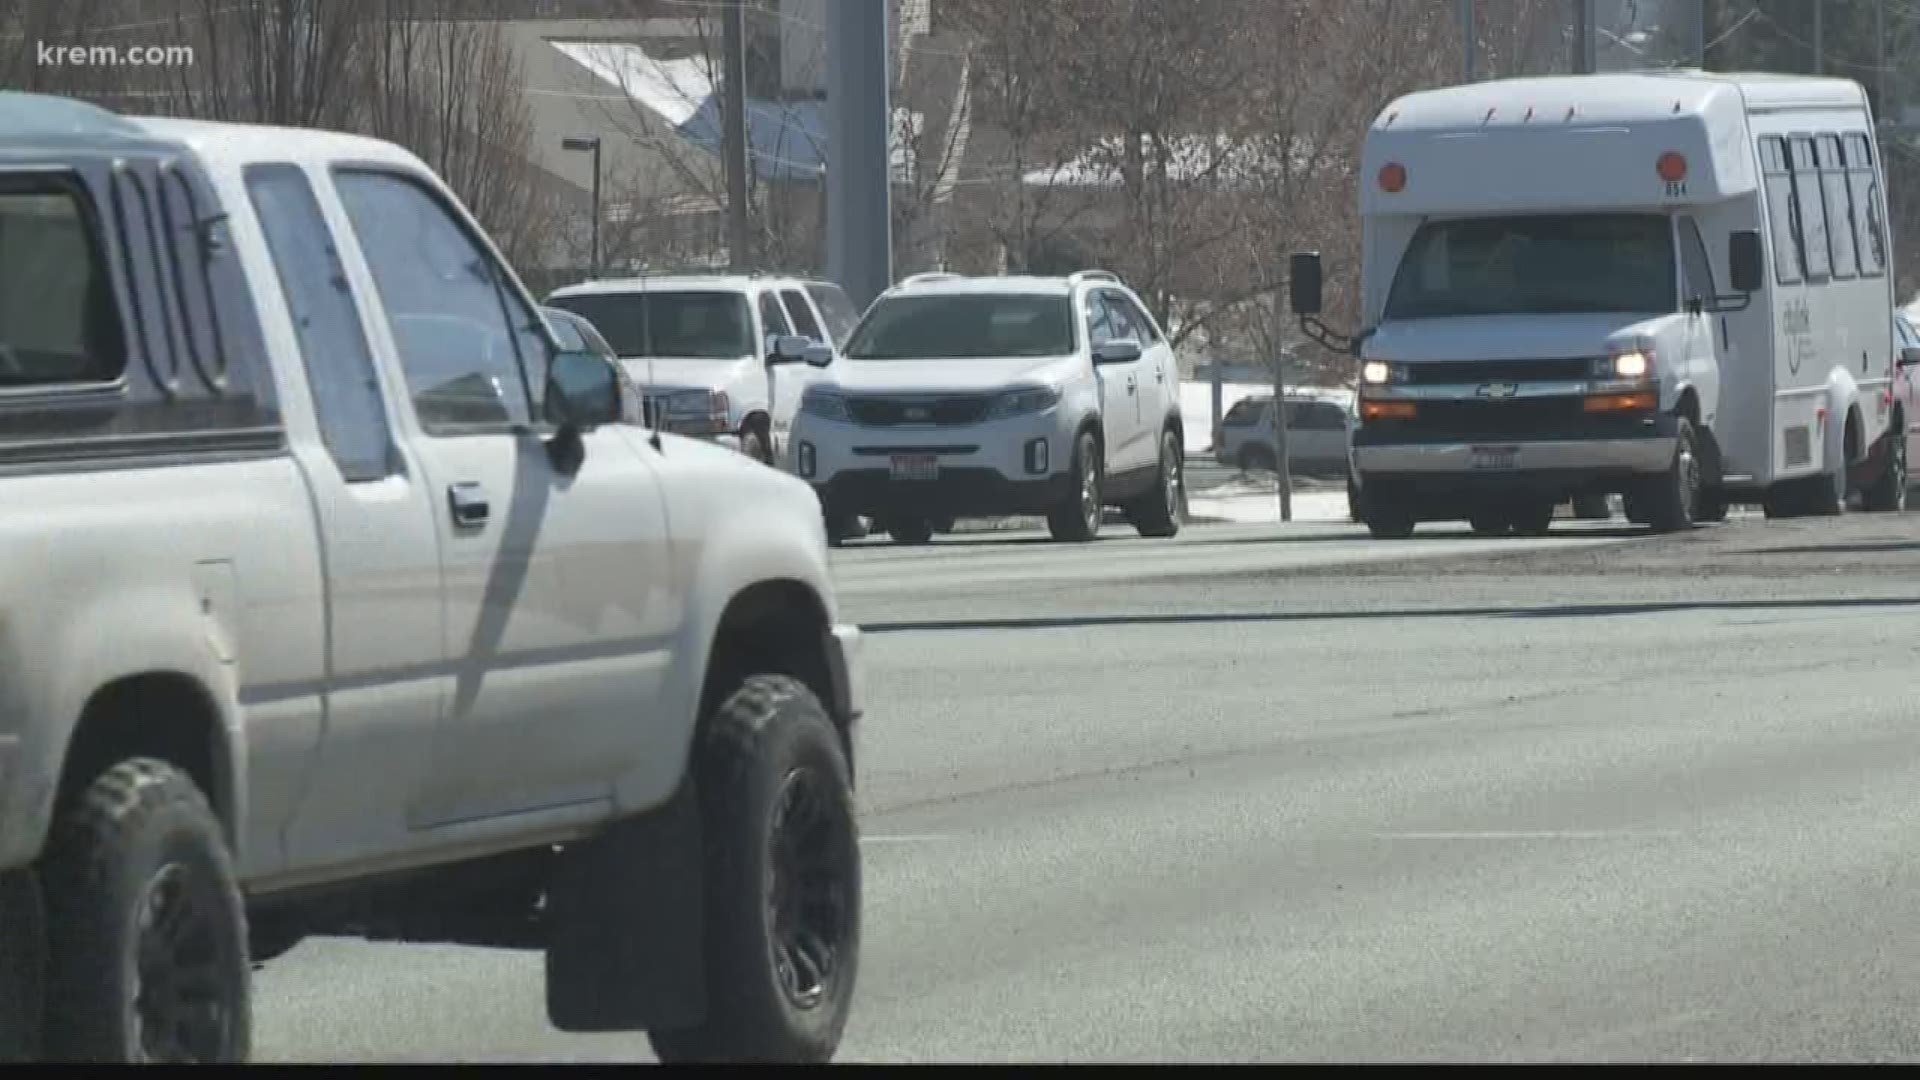 KREM Reporter Taylor Viydo spoke with ITD and Coeur d'Alene officials about the city taking over control of certain traffic lights after complaints of long delays.